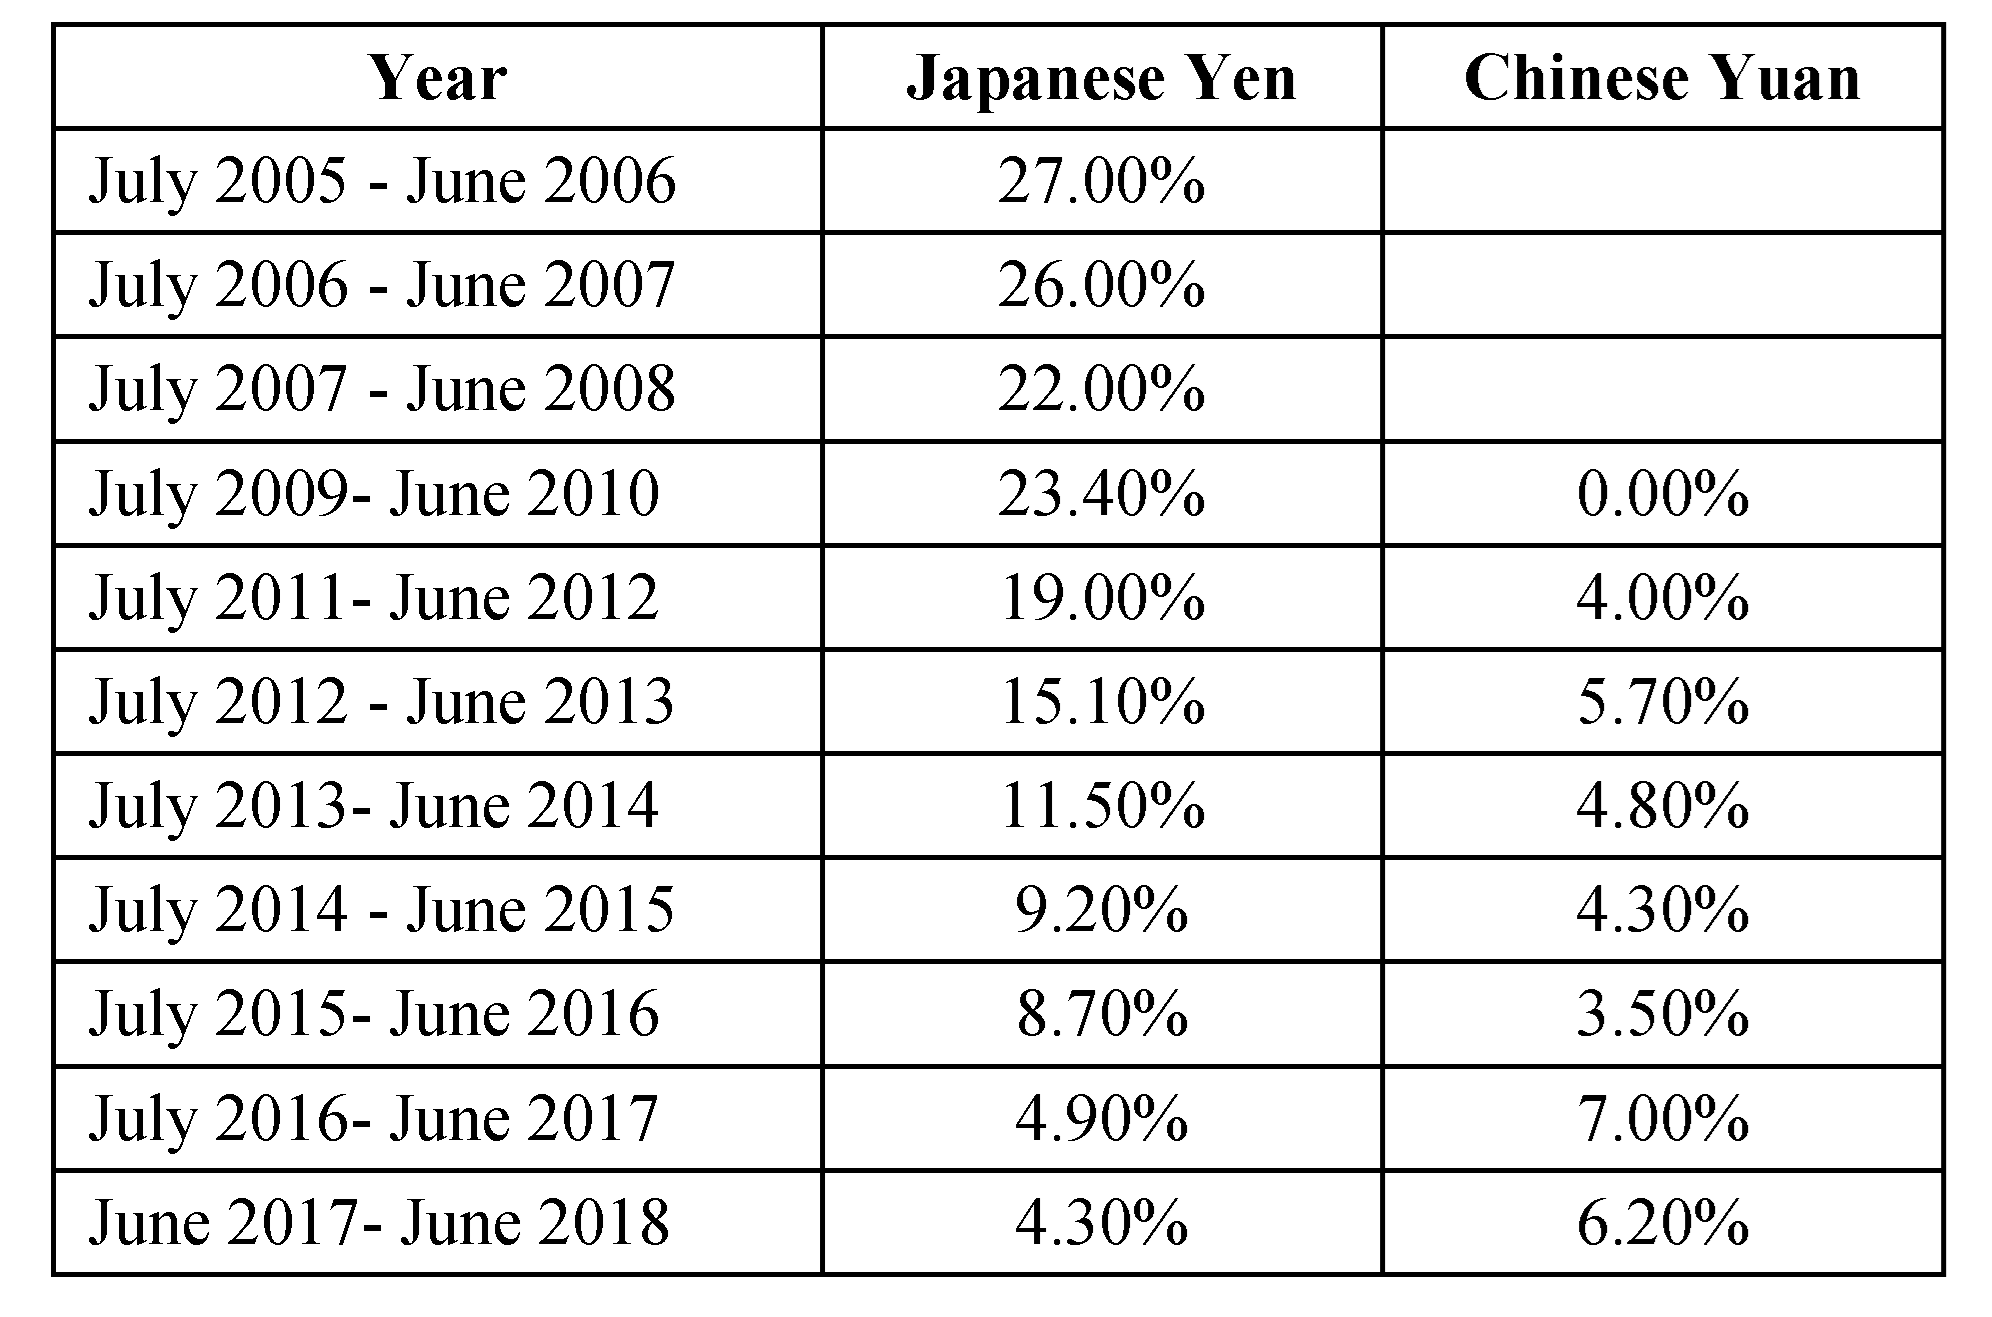 Table 2. Kenya’s % of External Debt by Major Currencies/ Japanese Yen and Chinese Yuan Data from: [22].